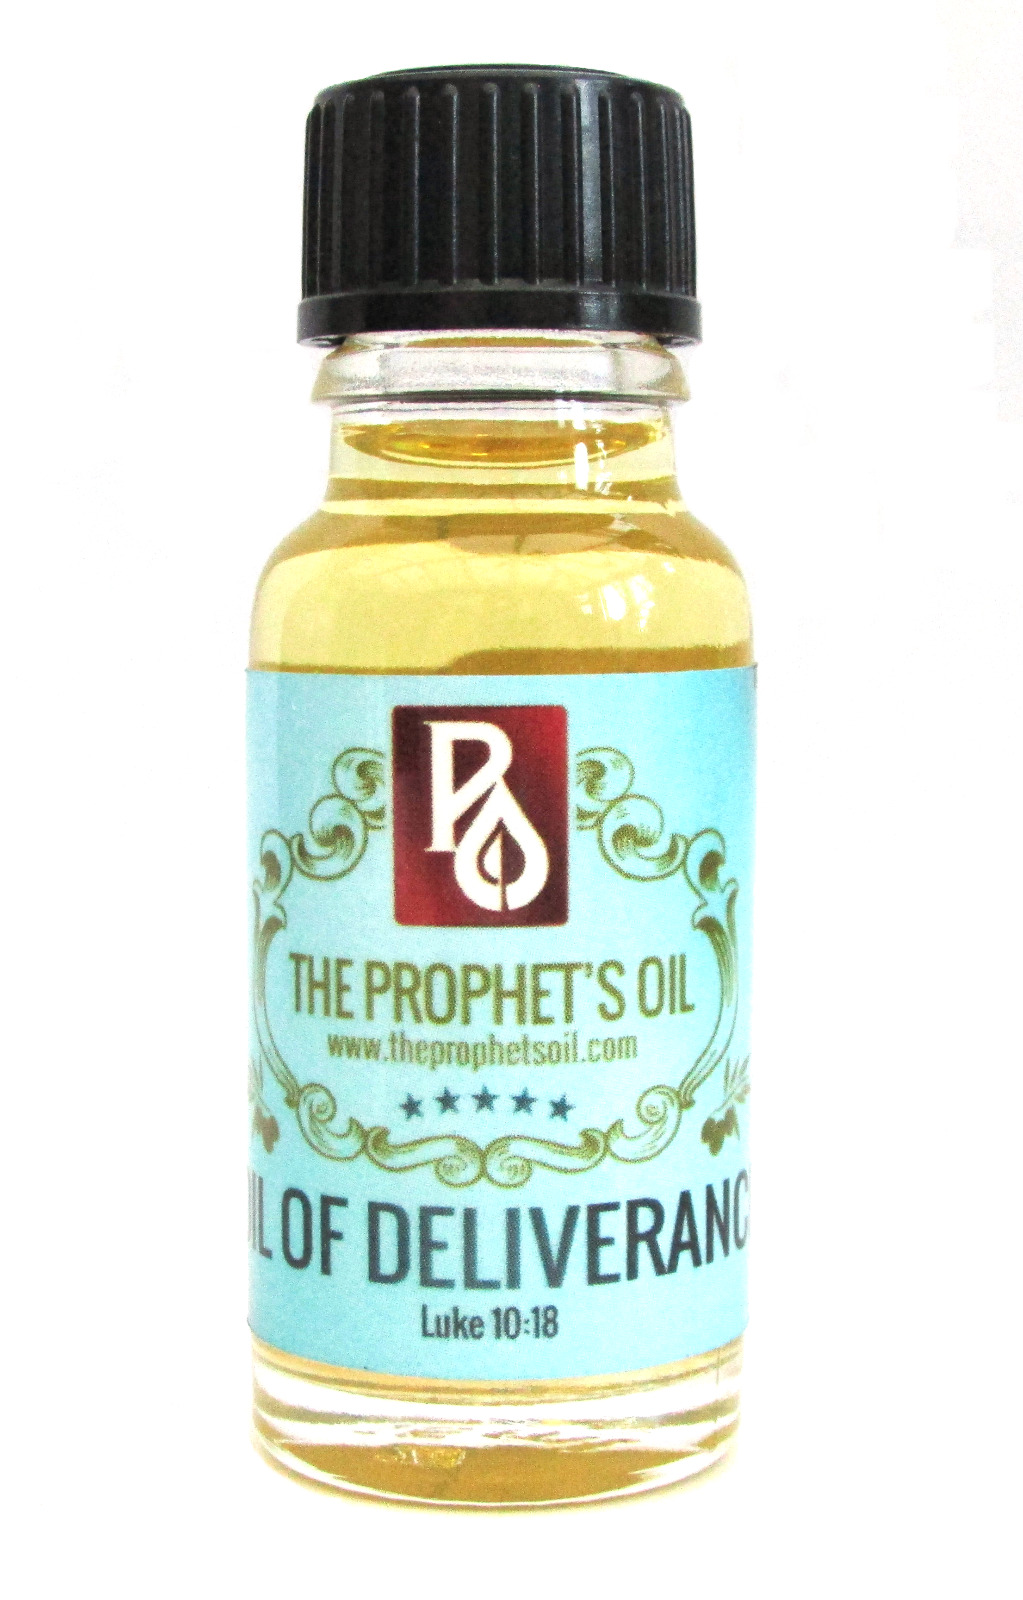 The Oil of Deliverance Holy Anointing Oil